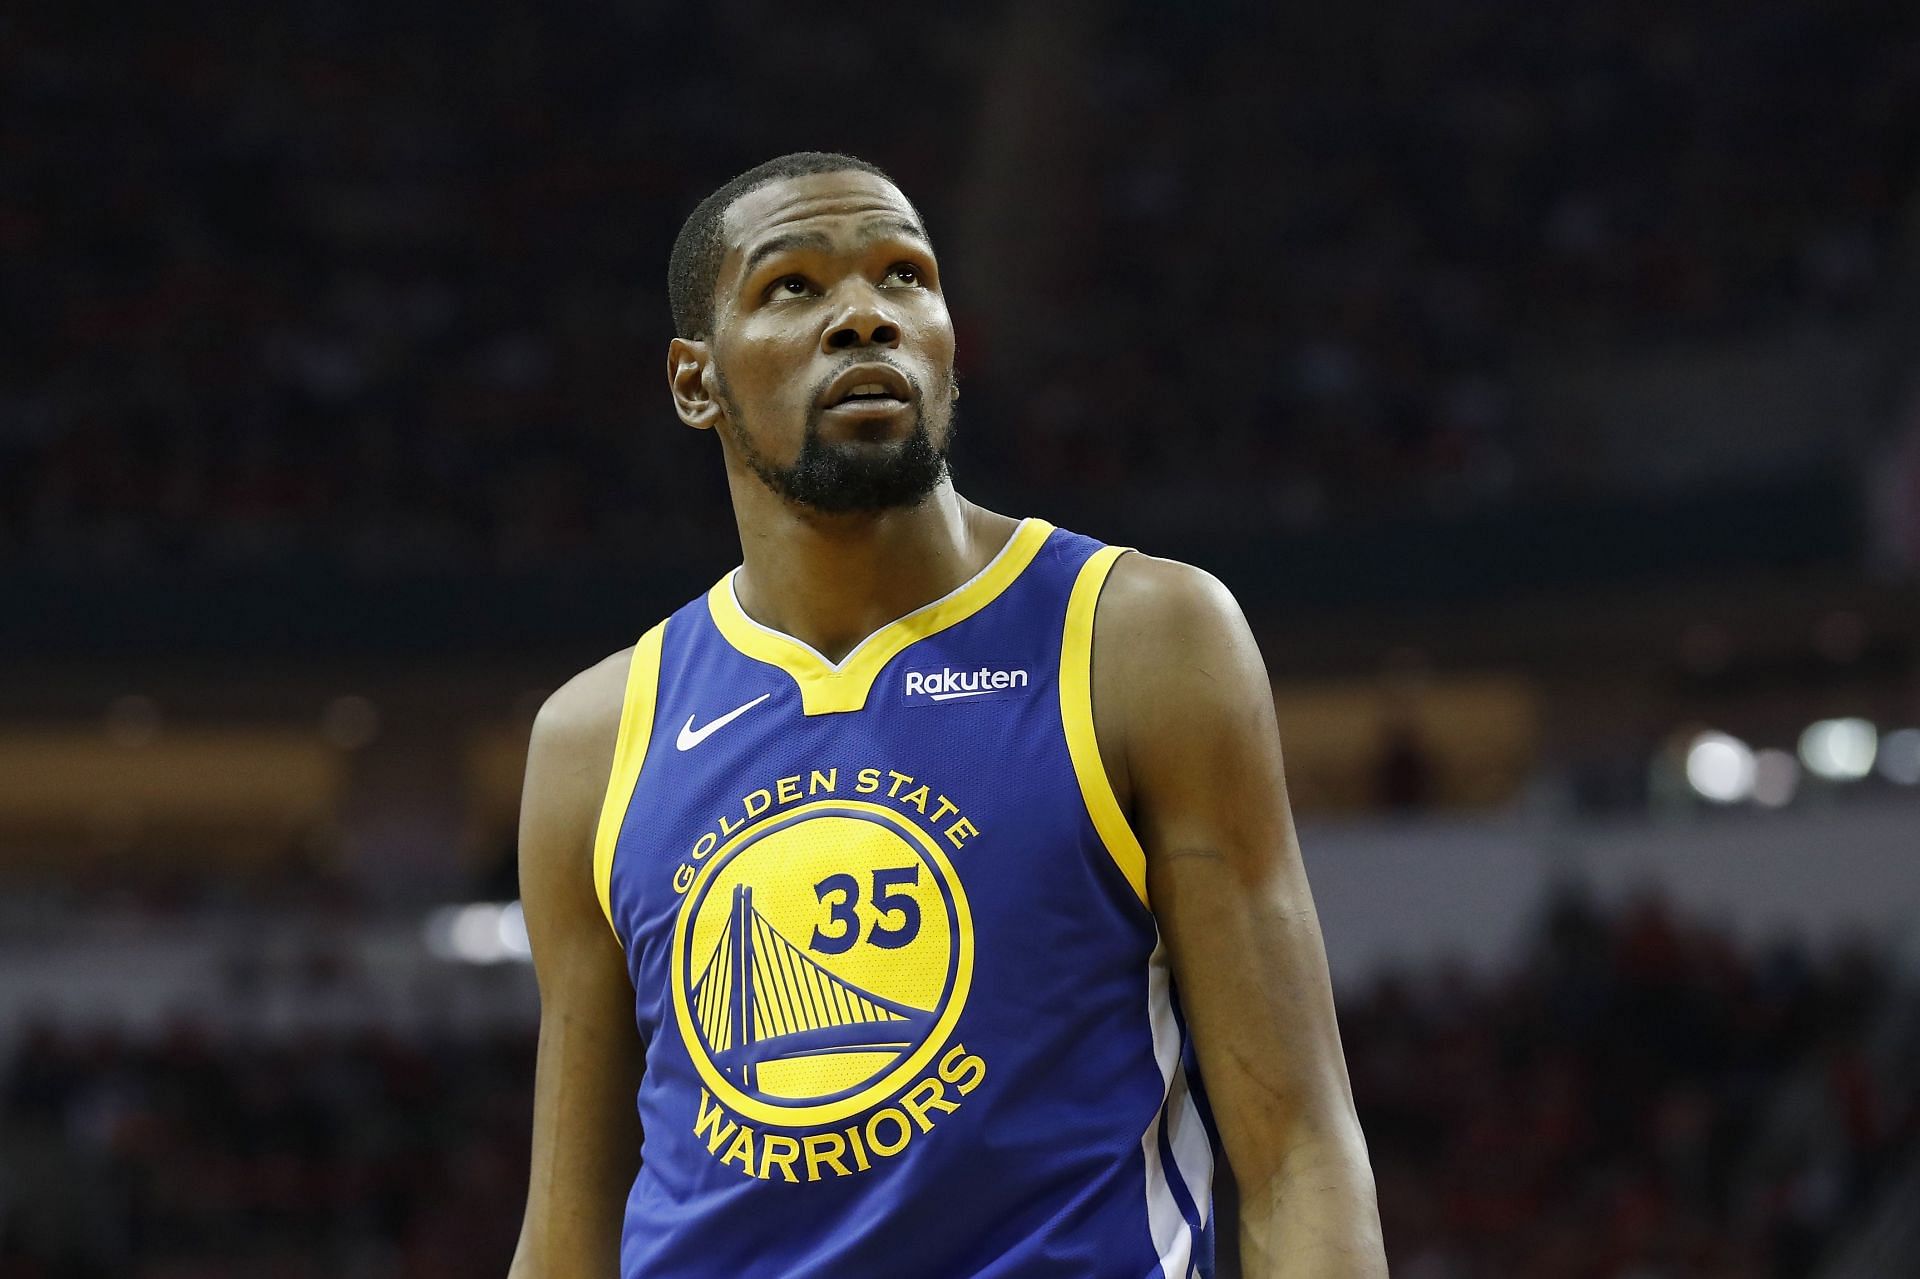 Kevin Durant of the Golden State Warriors looks toward the scoreboard in the second quarter during Game 3 of the 2019 Western Conference semifinals against the Houston Rockets on May 4, 2019, in Houston, Texas.